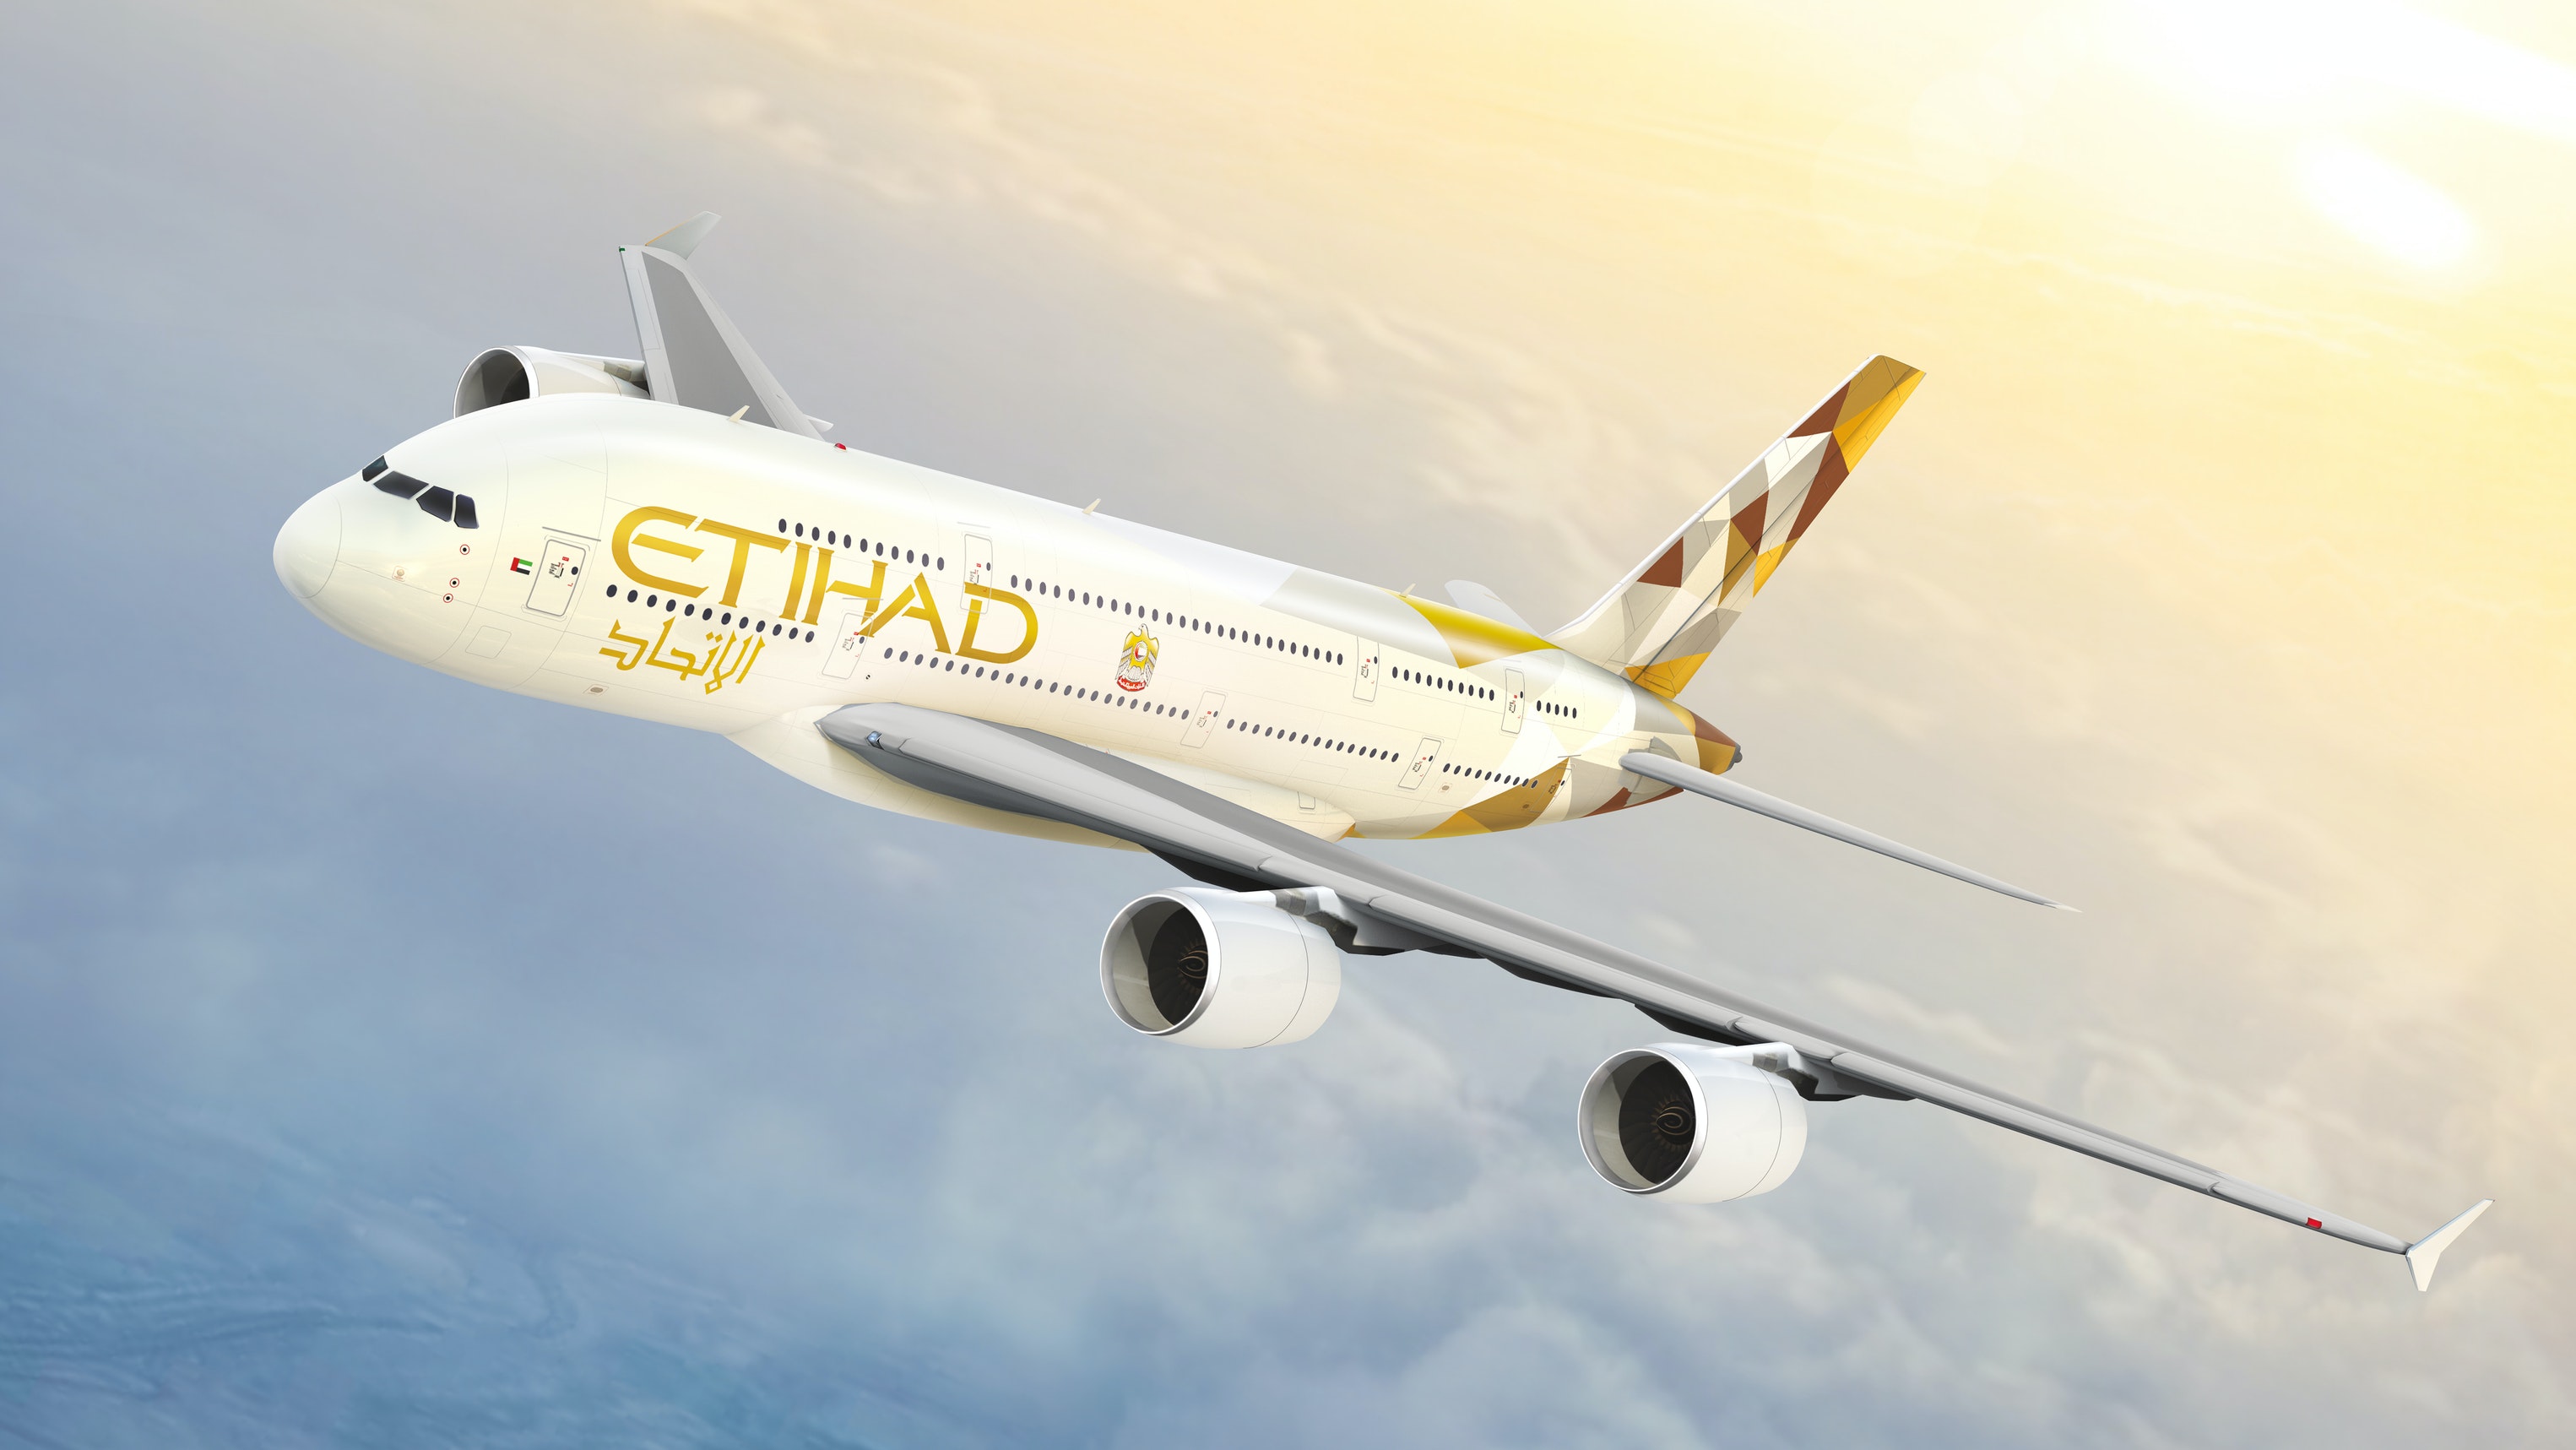 Etihad Airways is a company that provides travel services